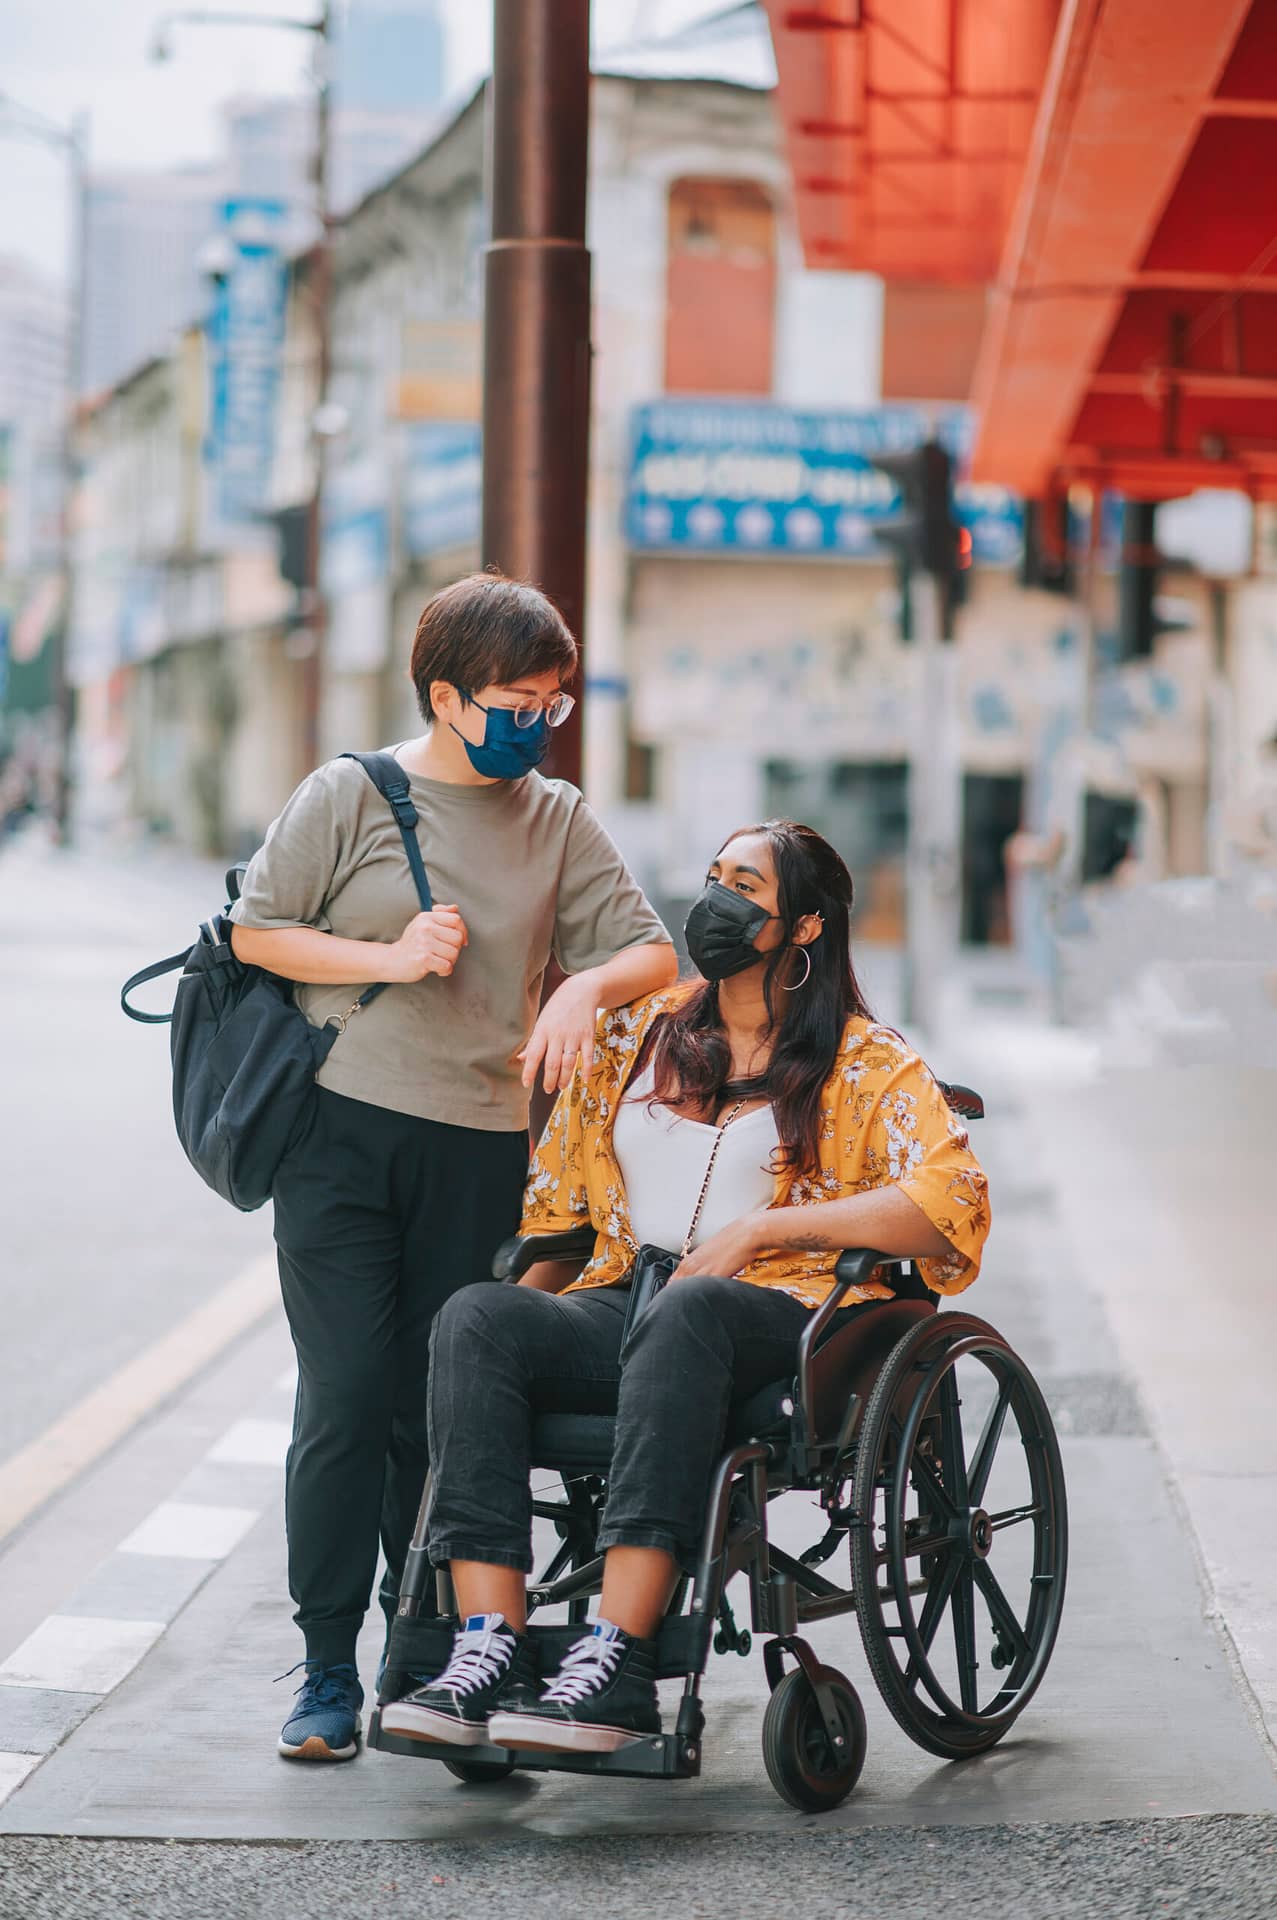 A Chinese woman talking to her friend, an Indian woman with disability using a wheelchair. They are on a sidewalk in a busy city.